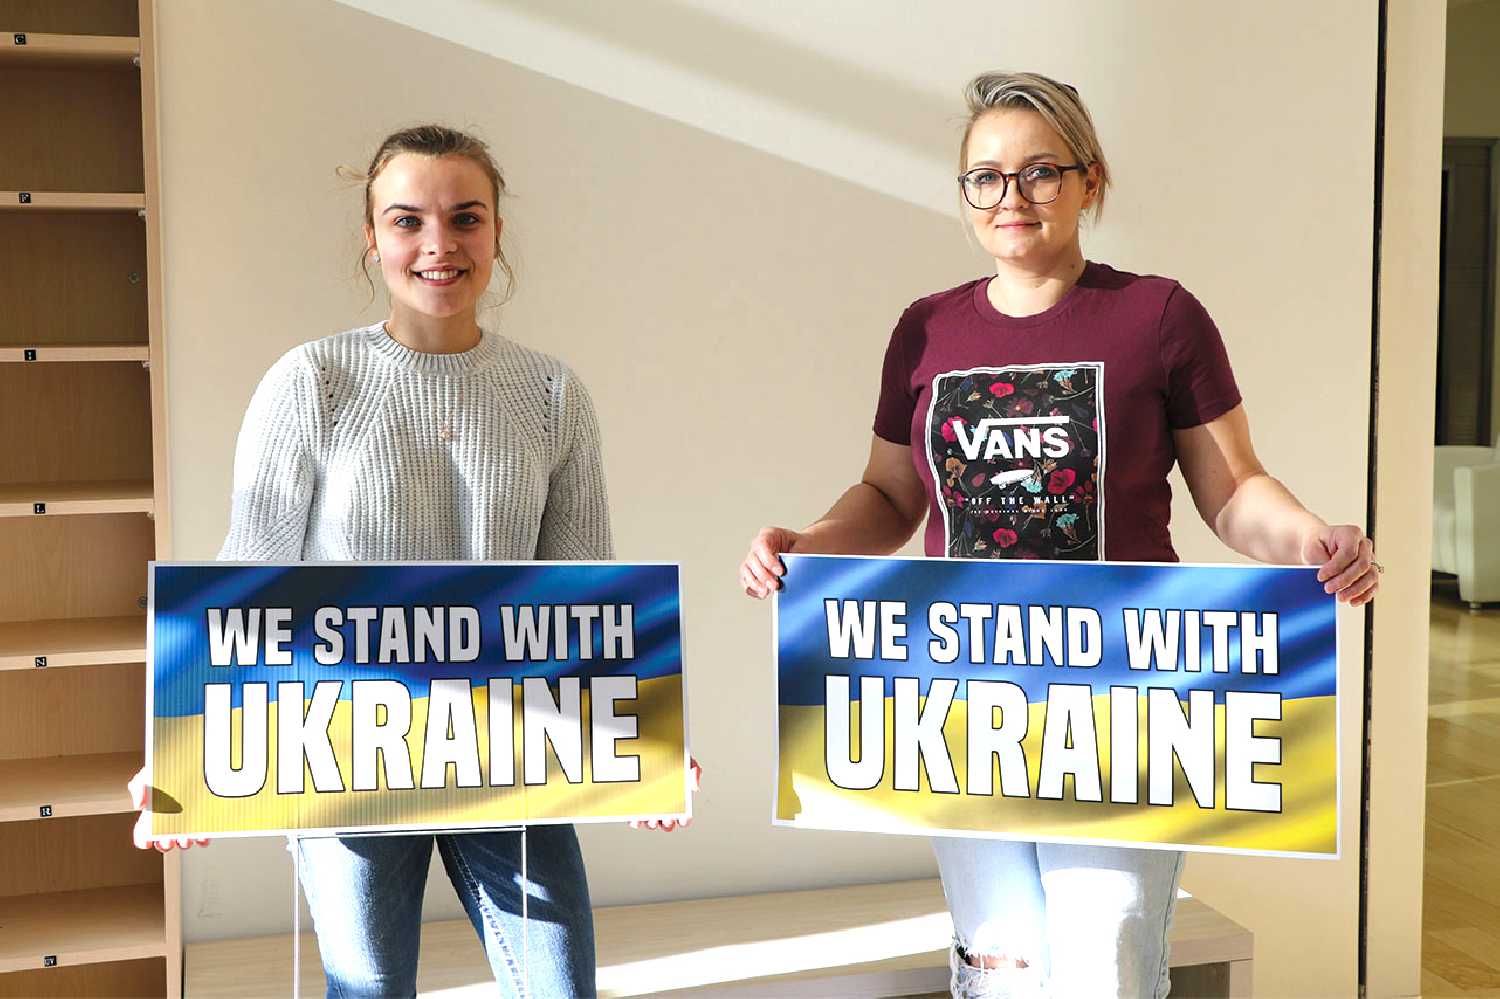 A plan for hosting Ukrainian Refugees in Moosomin will be discussed at the March 15 Chamber meeting. The local Ukrainian community has already raised $15,000 for Ukrainian relief efforts. Lawn signs and posters are available at the World-Spectator office, with all proceeds going to Ukrainian relief efforts.